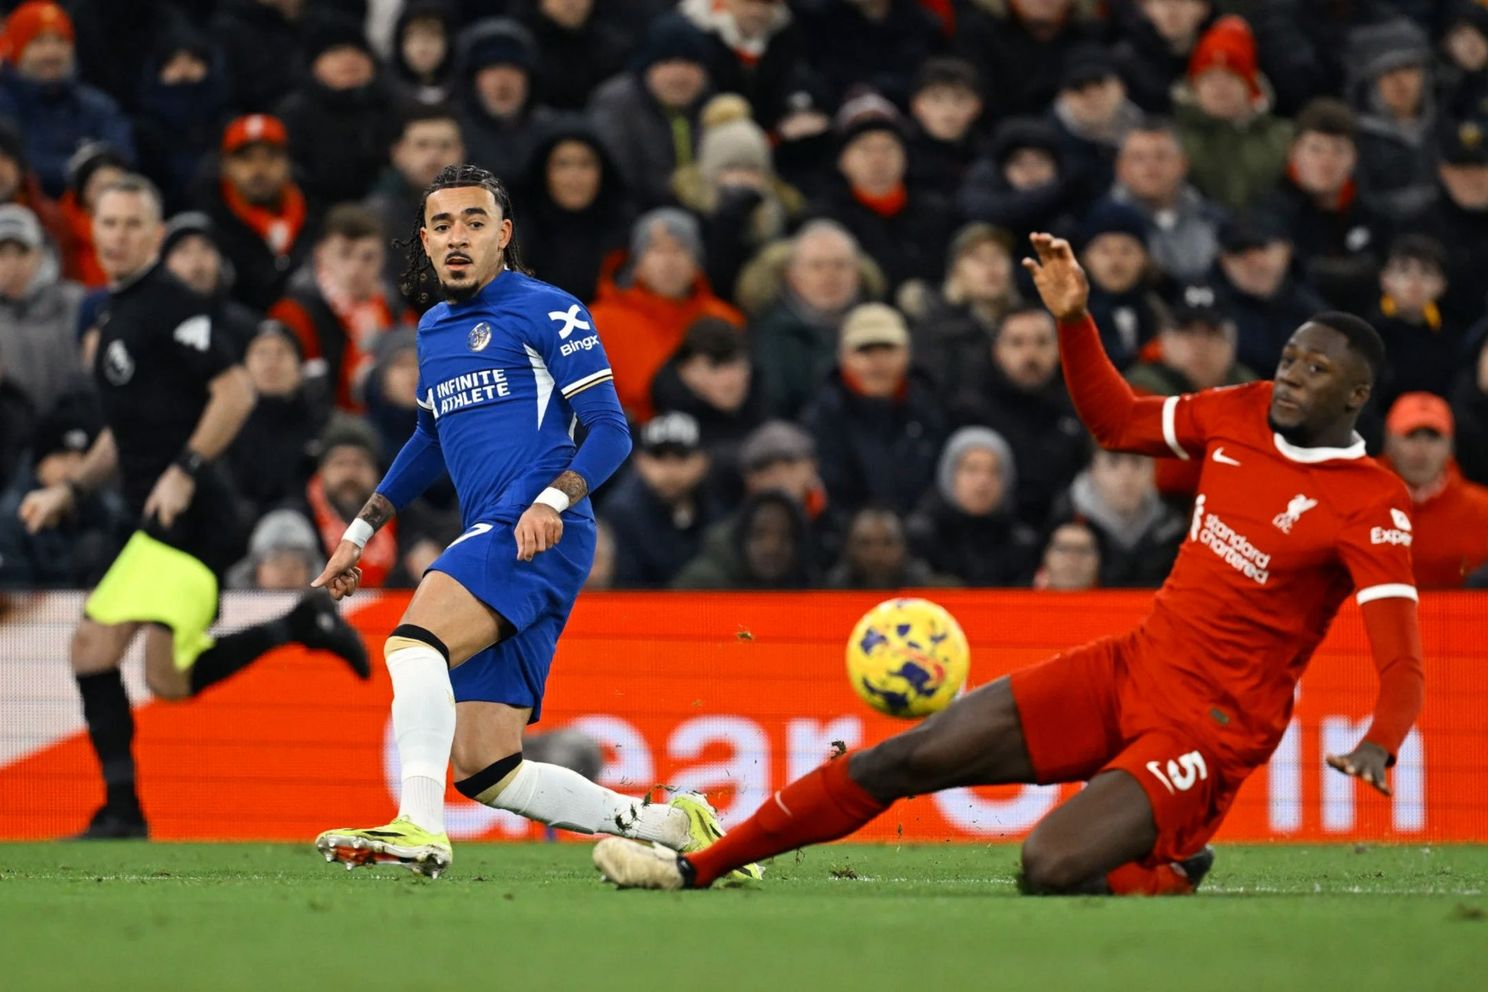 Six talking points from Liverpool's dominant 4-1 win over Chelsea to continue title charge